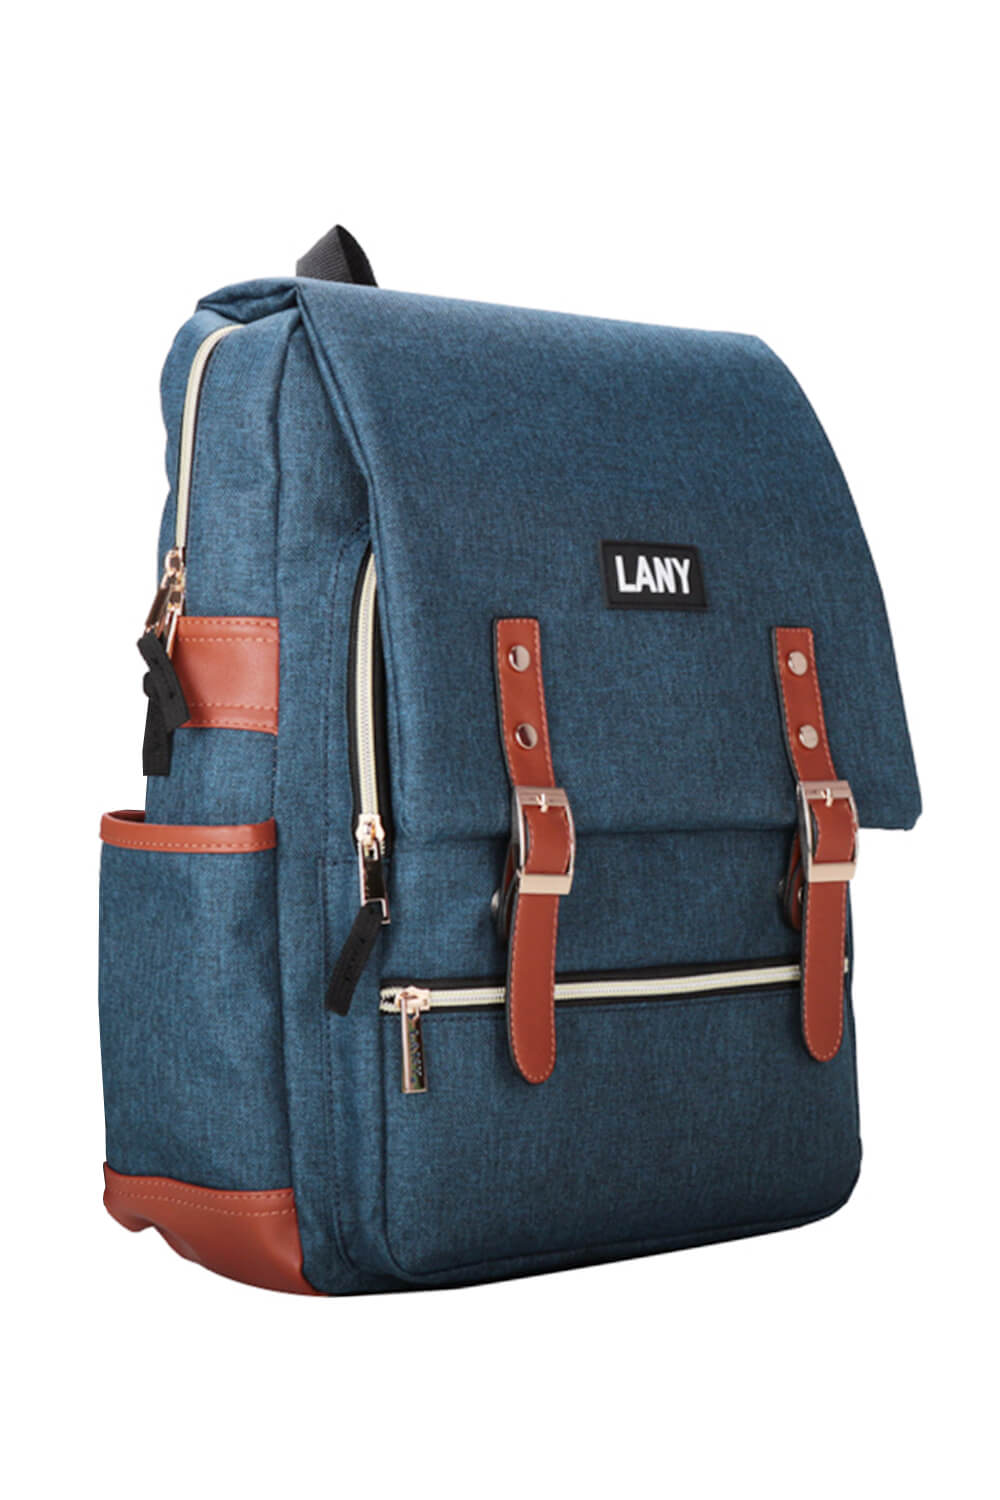 Buckle Up Backpack - LANY